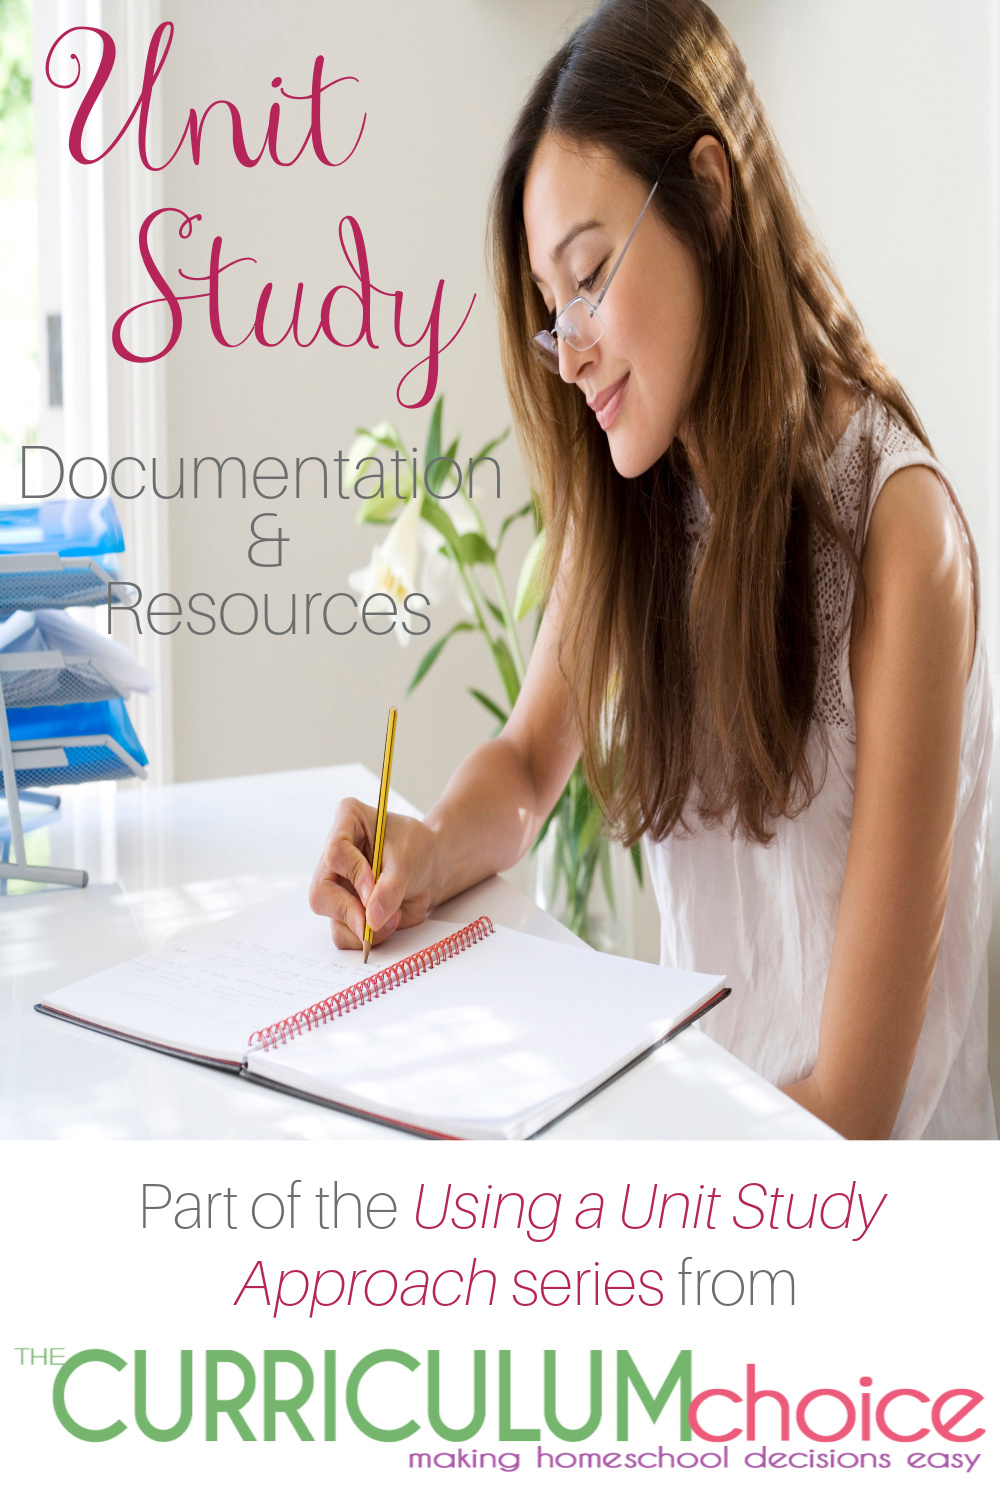 Unit Study Documentation & Resources offers ideas for record keeping as well as places to find good unit studies for your homeschool.